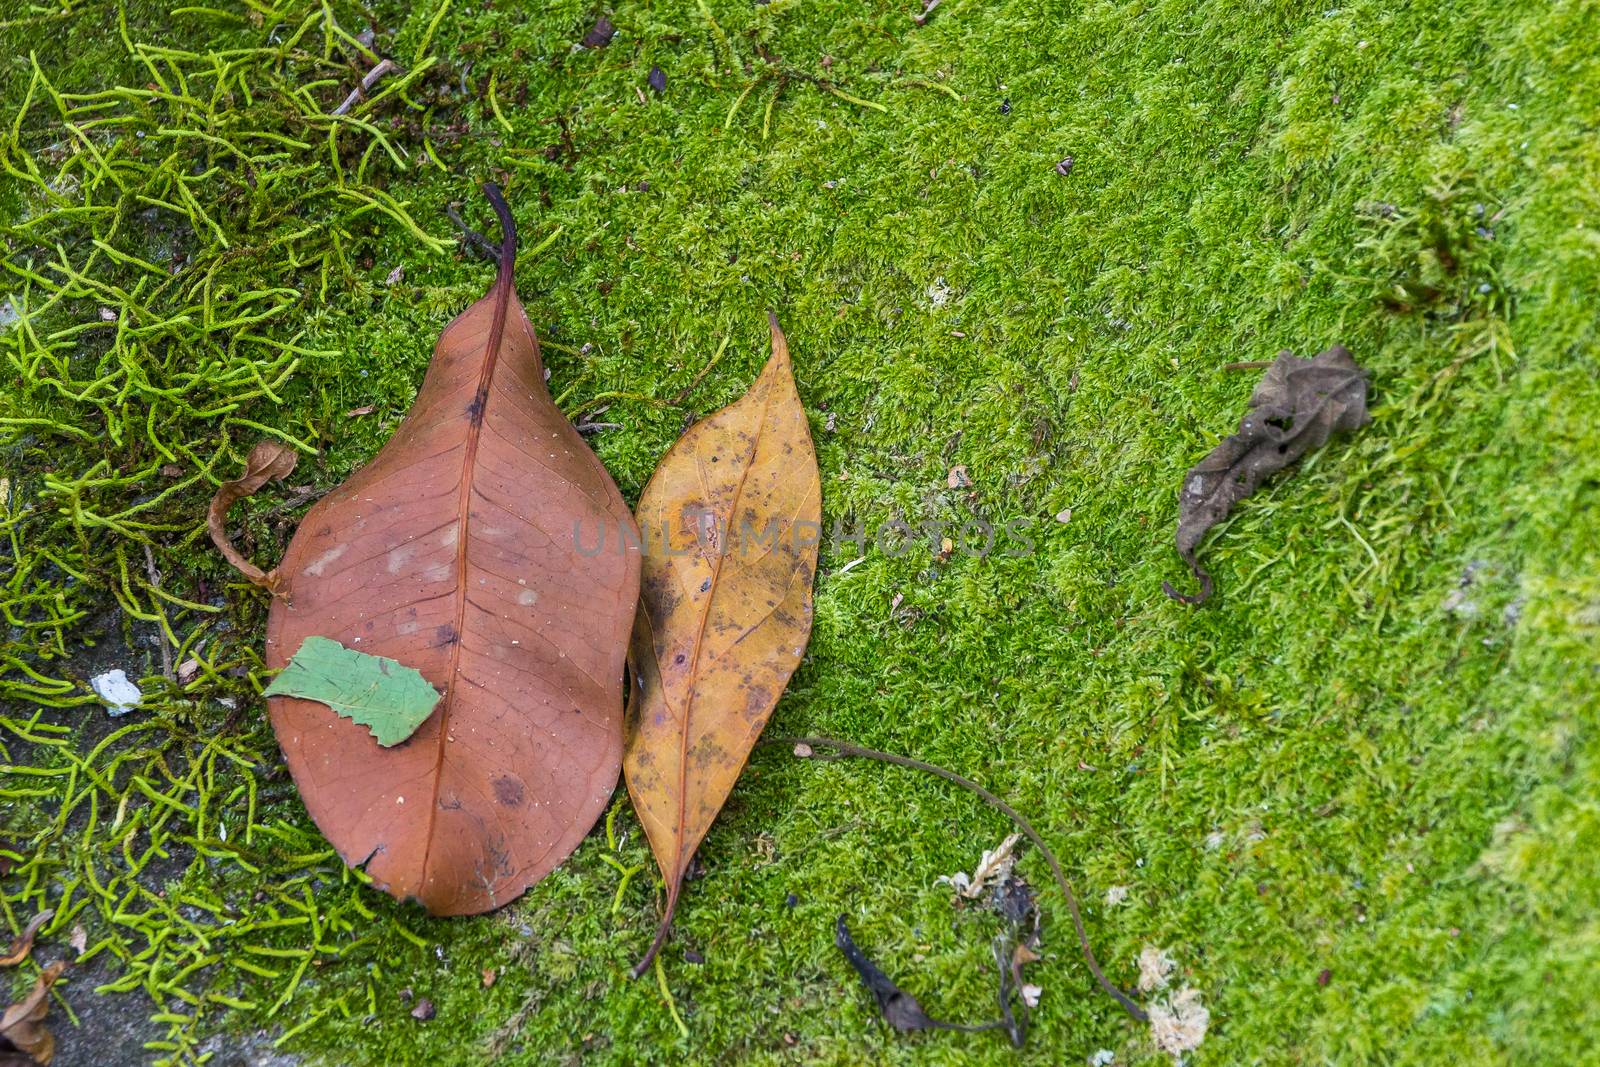 Autumn leave on moss, Moss in forest, dry leaf fallen on green moss floor